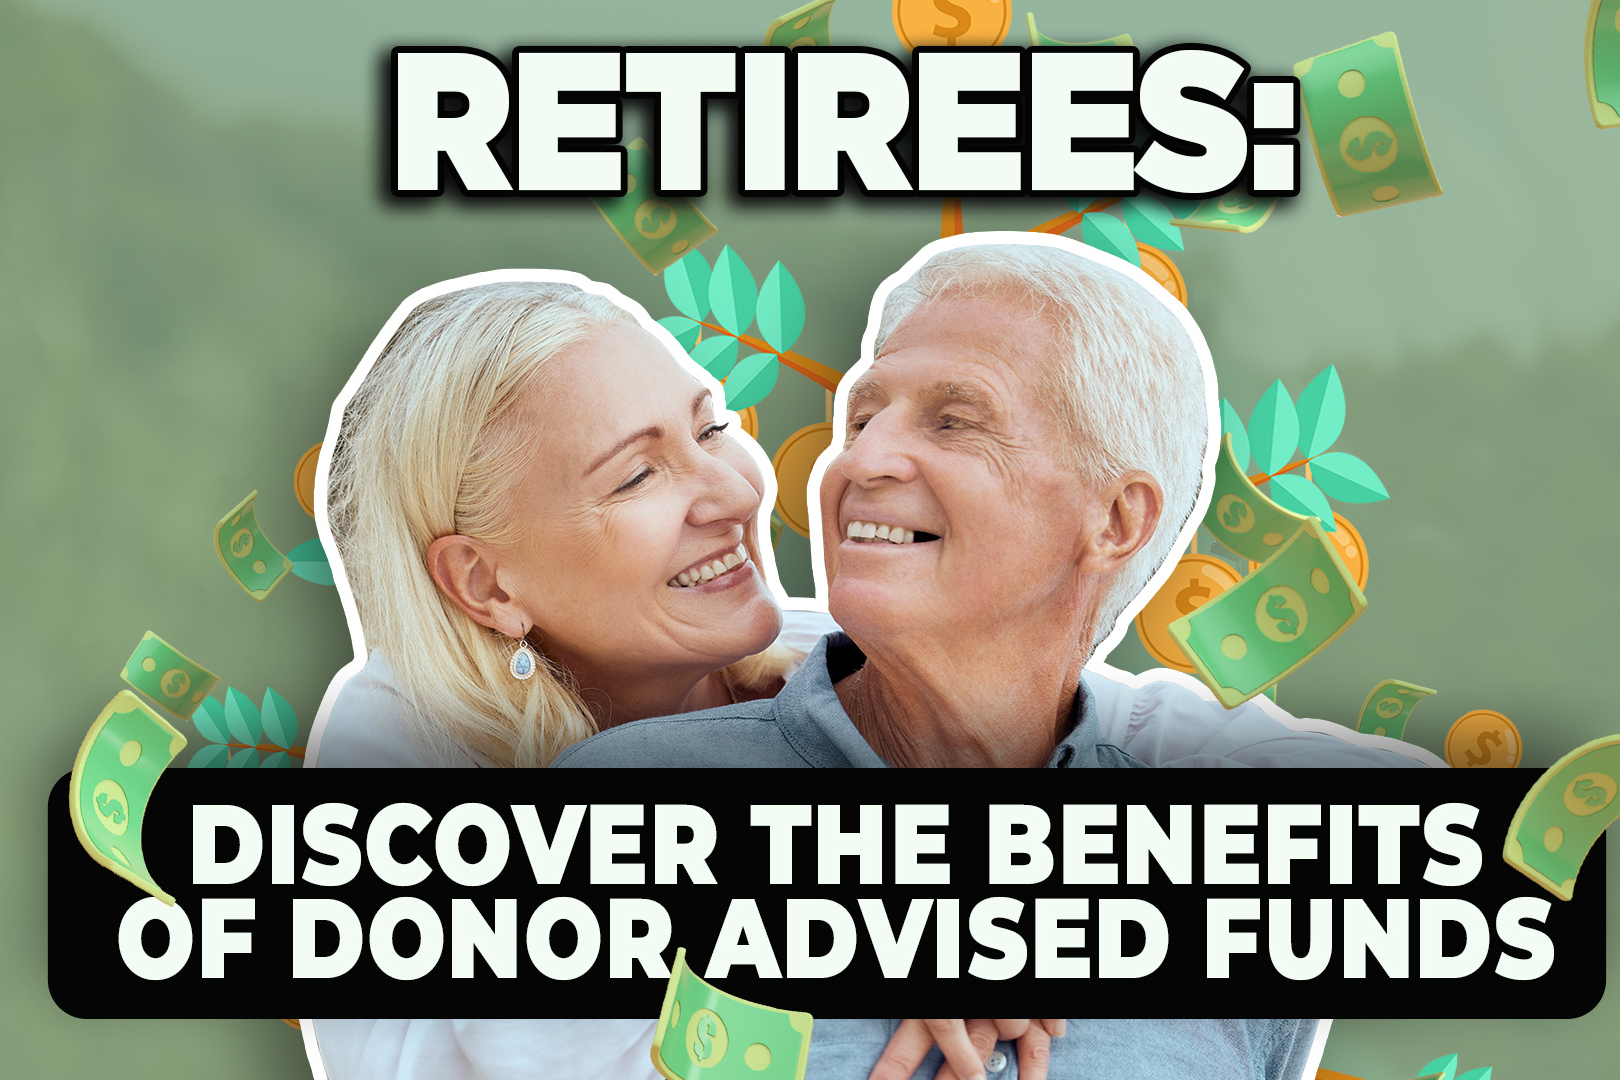 Retirees and Donor Advised Funds